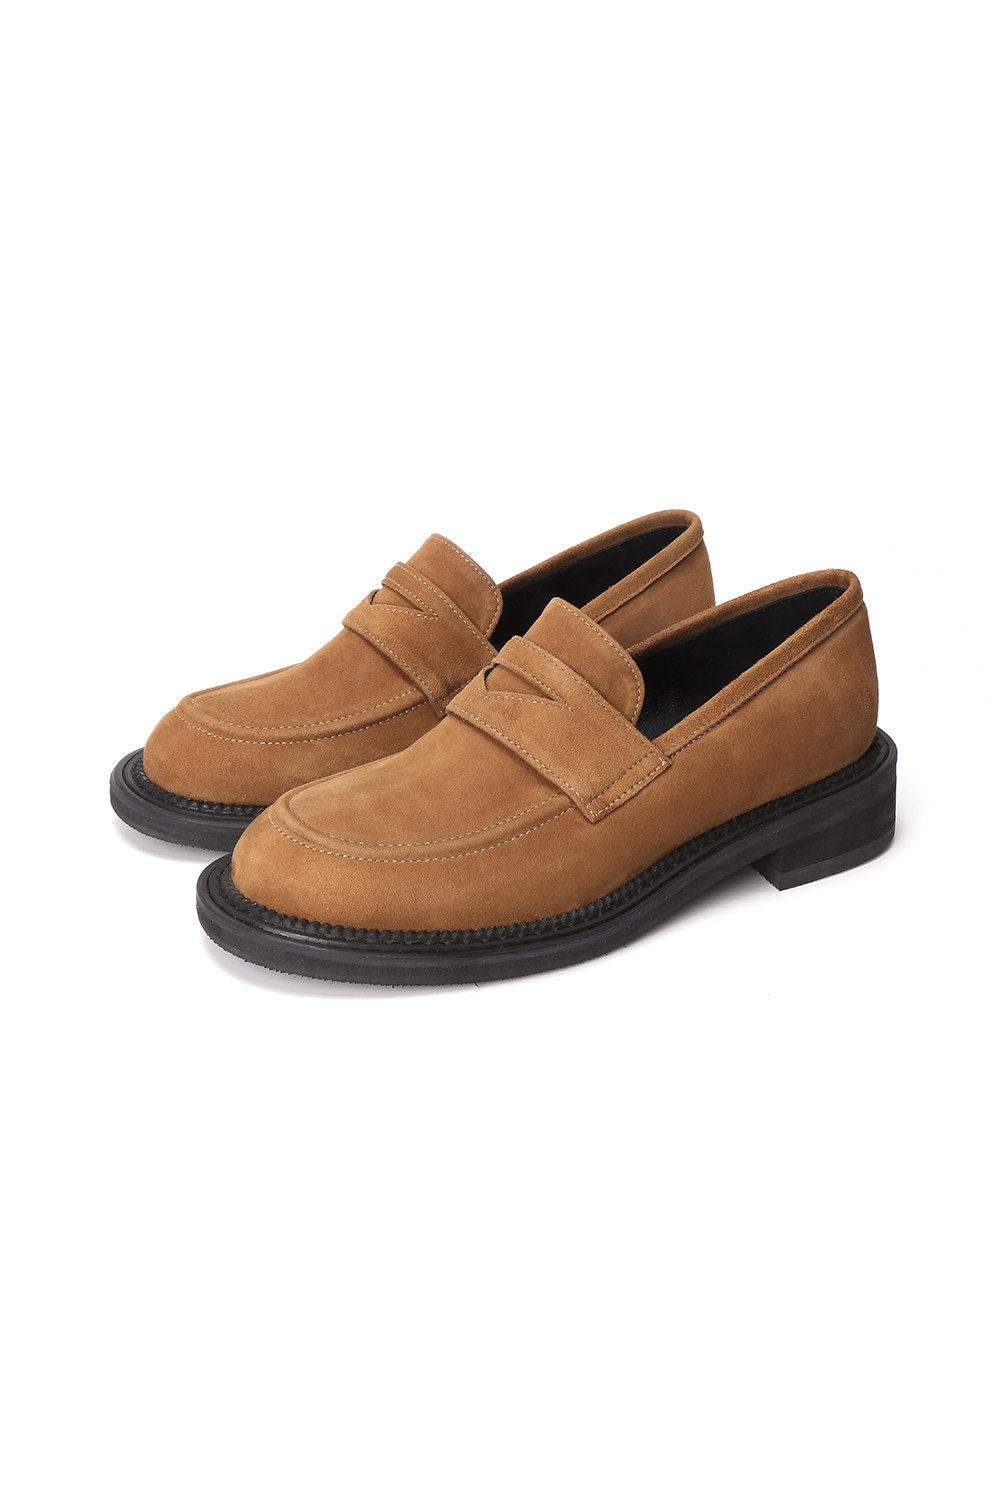 MANDY ROUND PENNY LOAFER [CAMEL SUEDE]